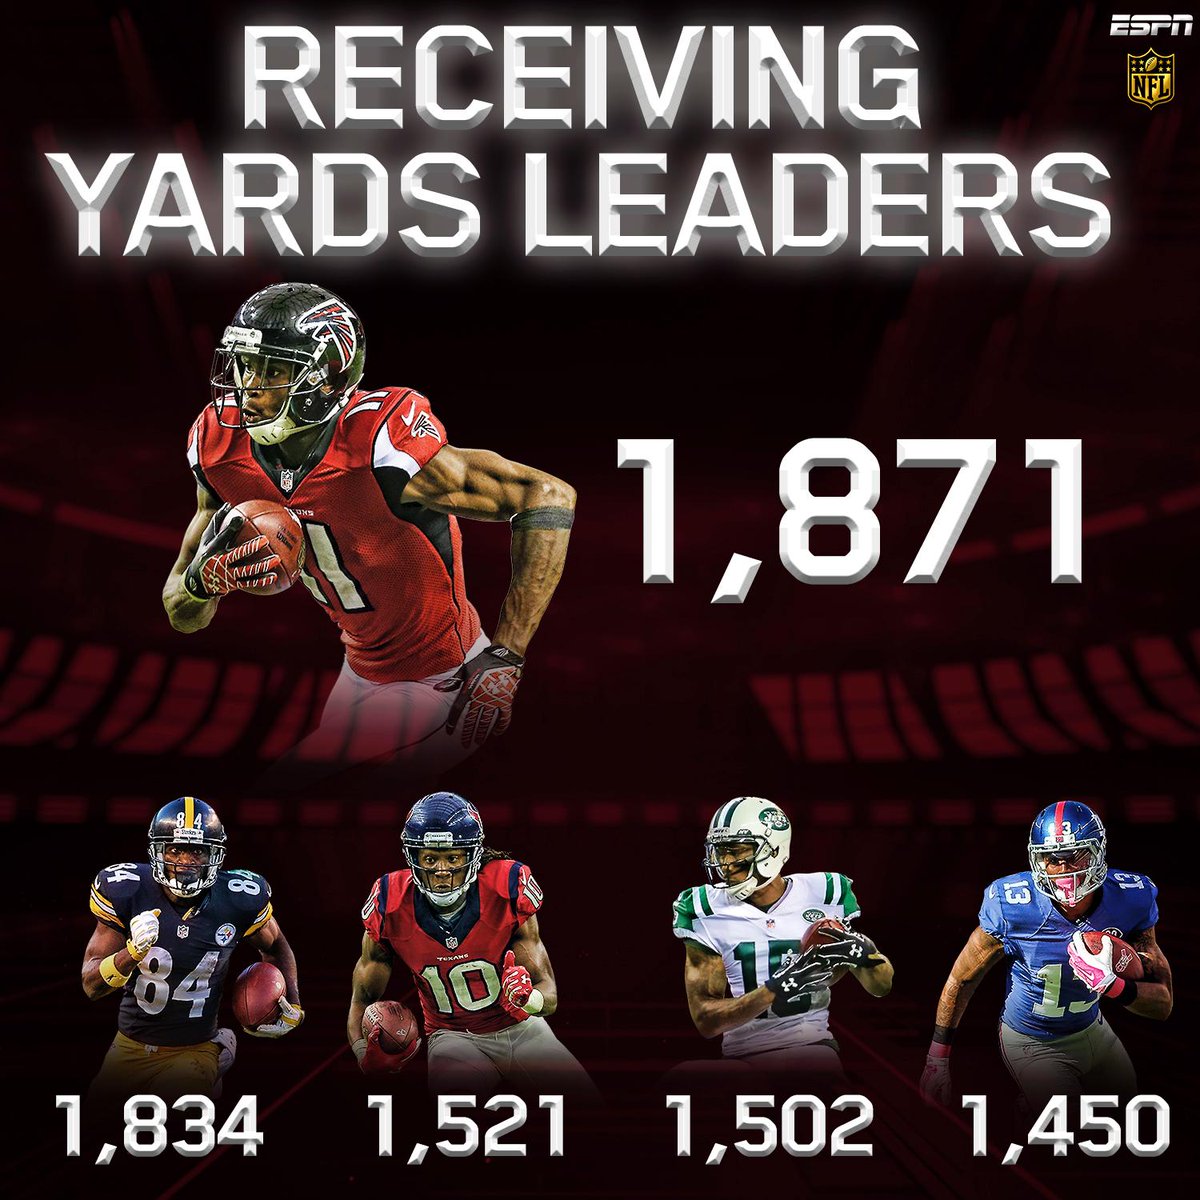 on ESPN on "Julio had the 2nd-most receiving yards in a season NFL history. https://t.co/srZblktr6V" / Twitter